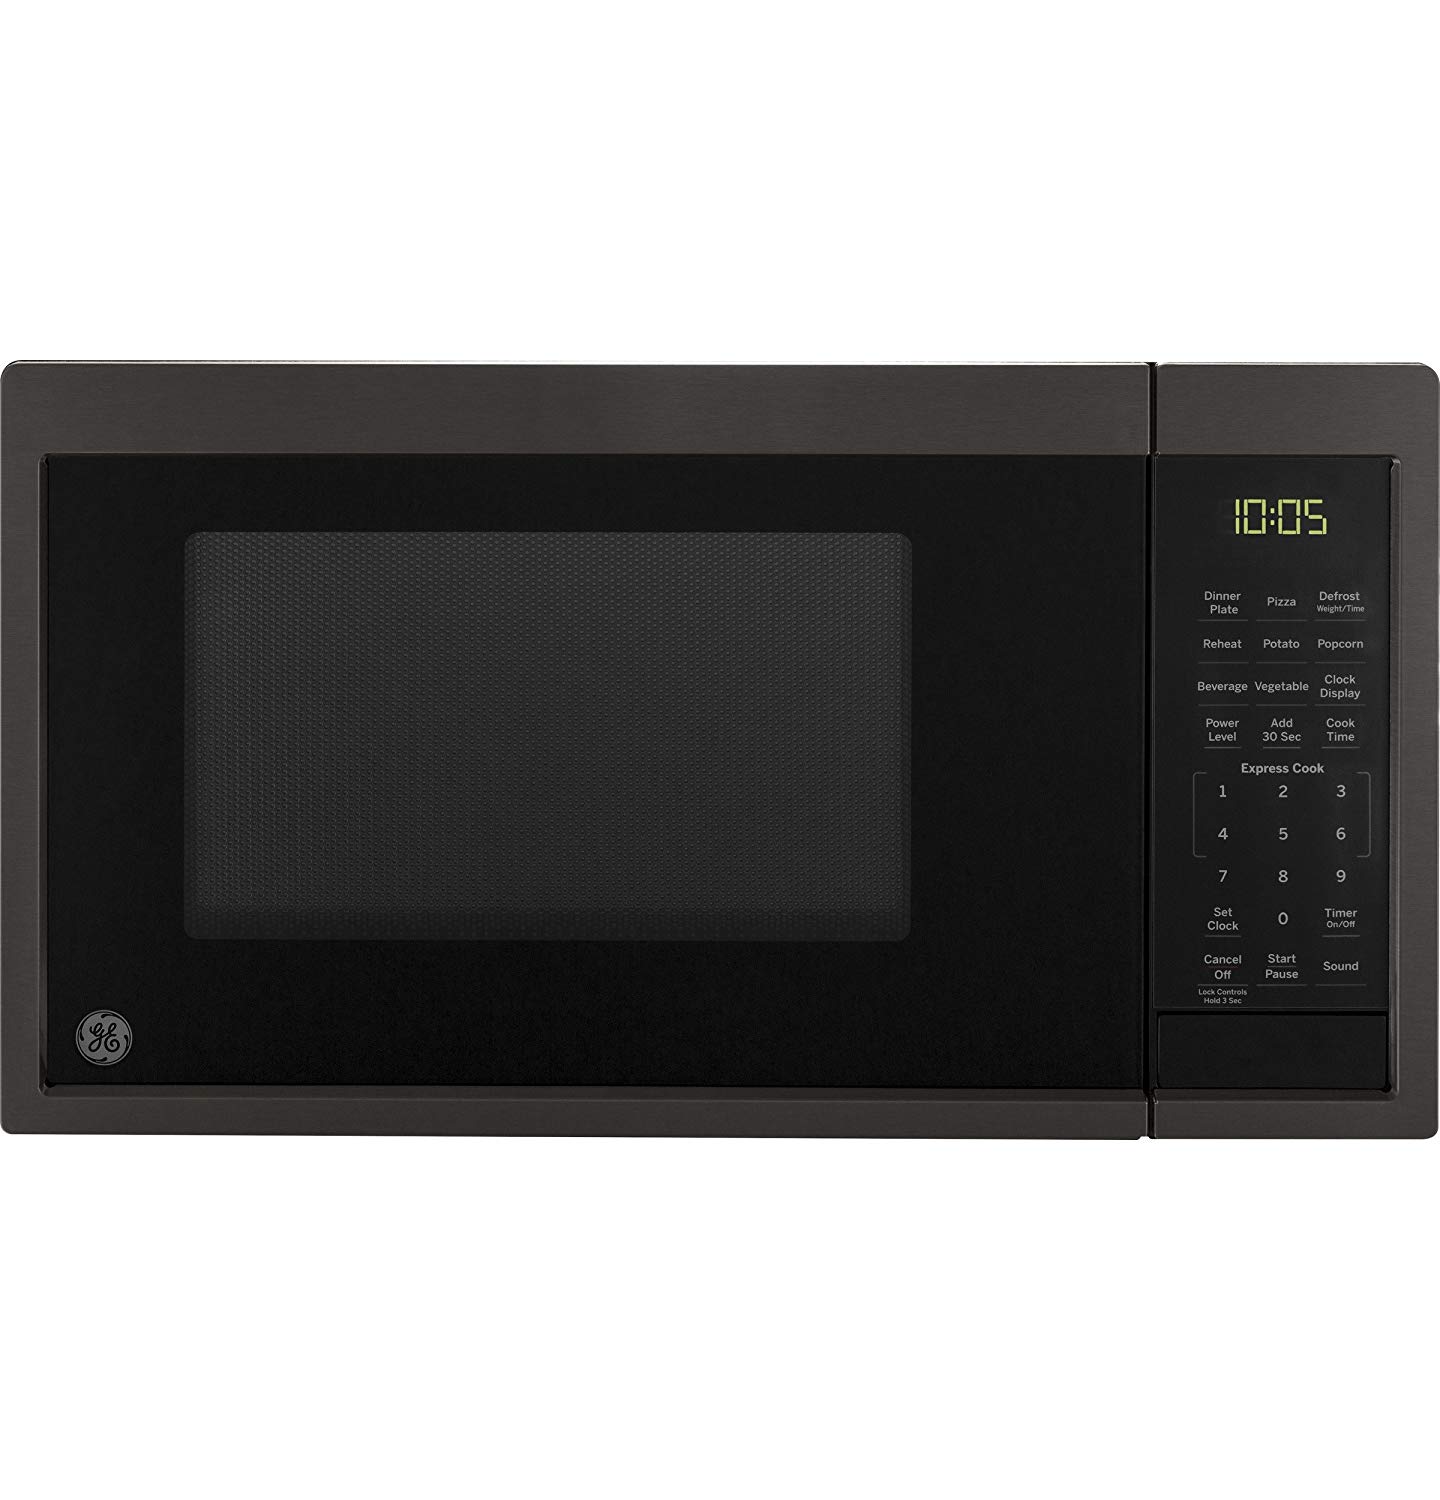 GE Appliances JES1095BMTS Microwave Oven, 0.9 Cu Ft, Black Stainless Steel